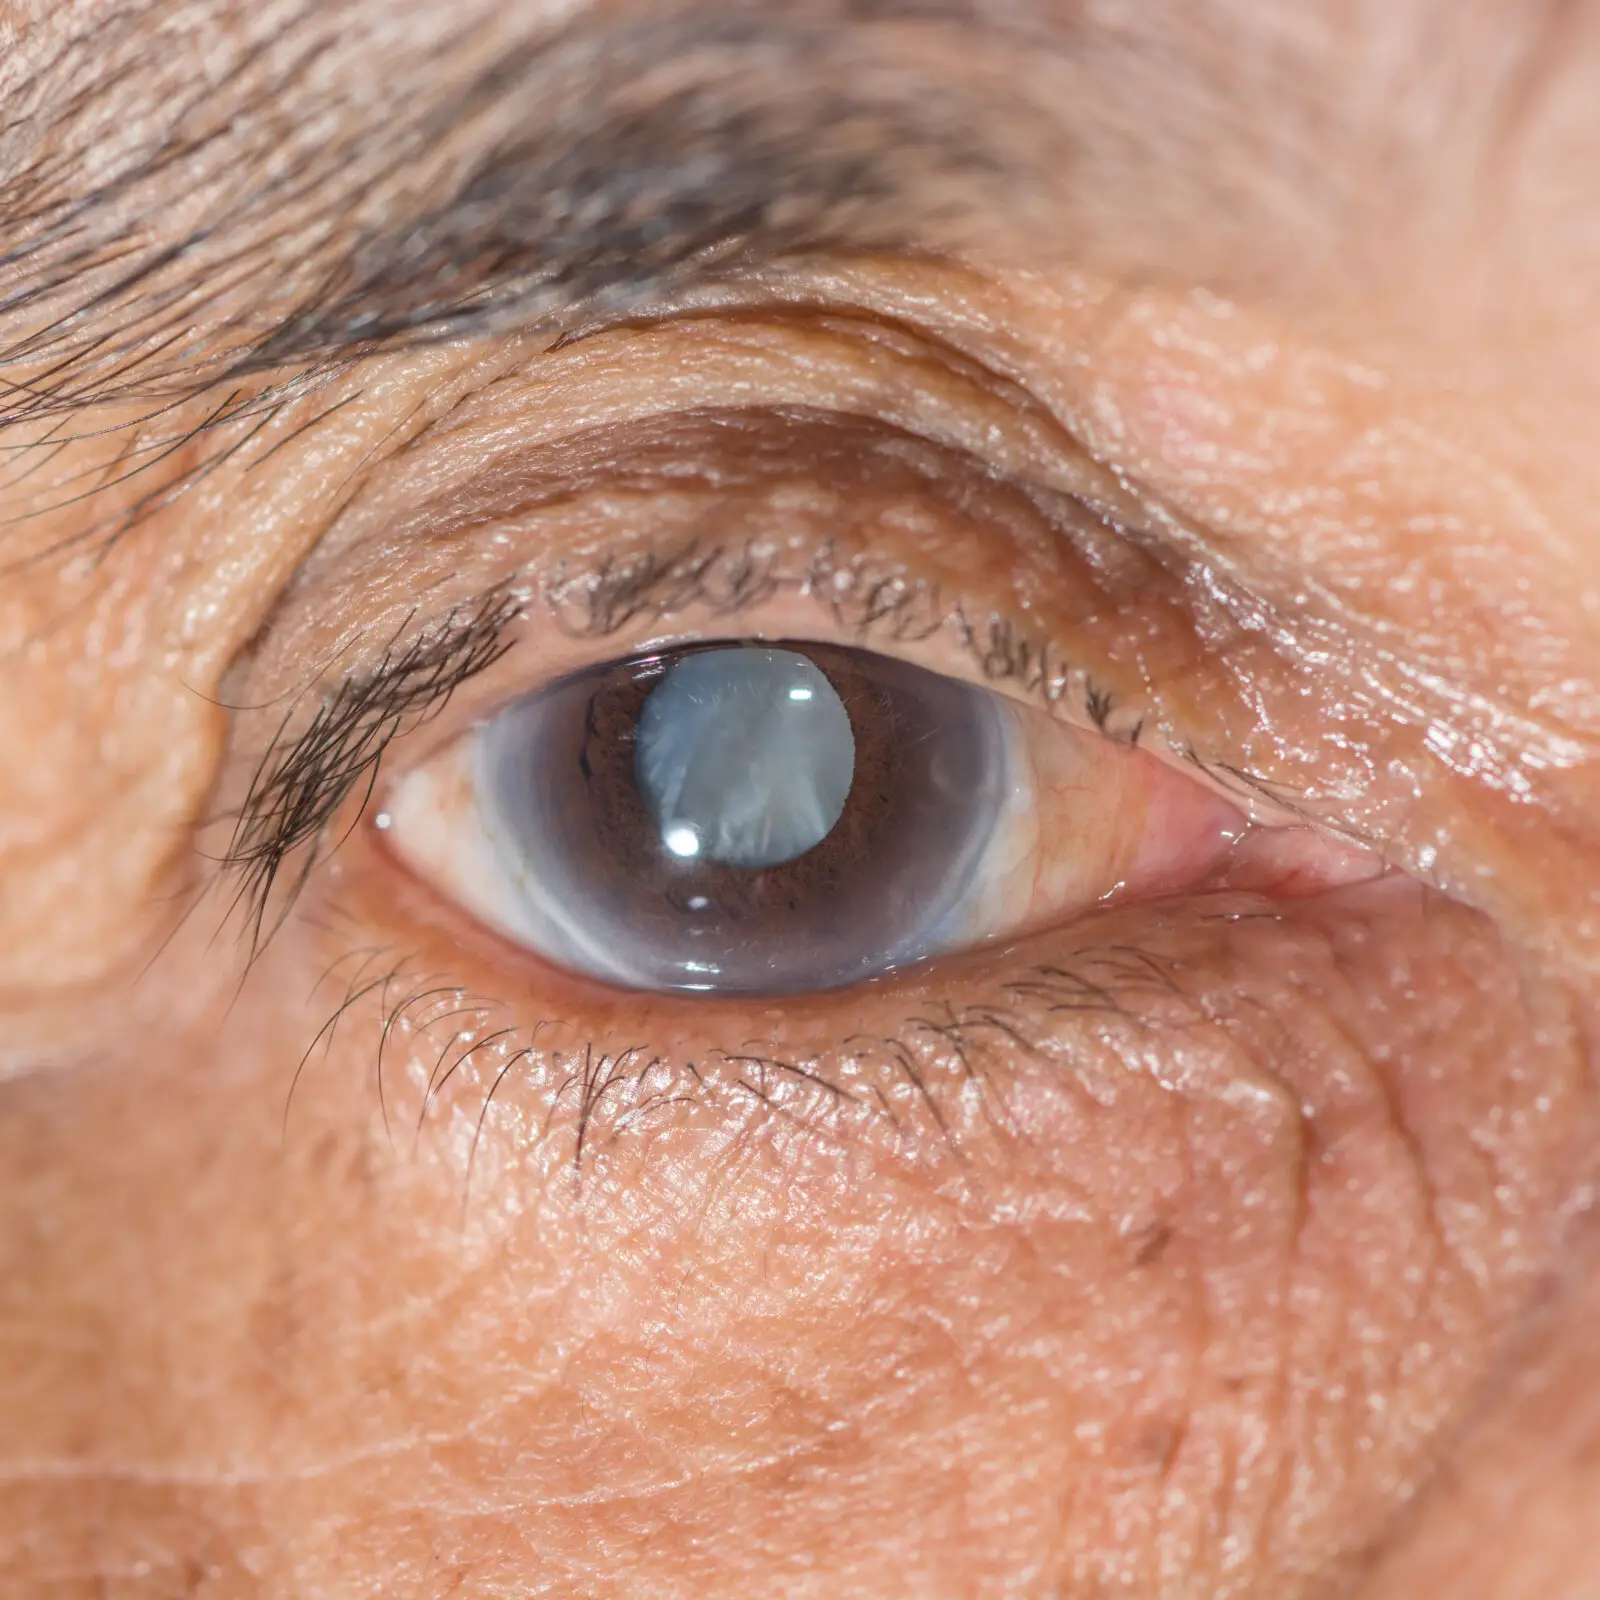 Does Medicare Cover Eye Surgery?